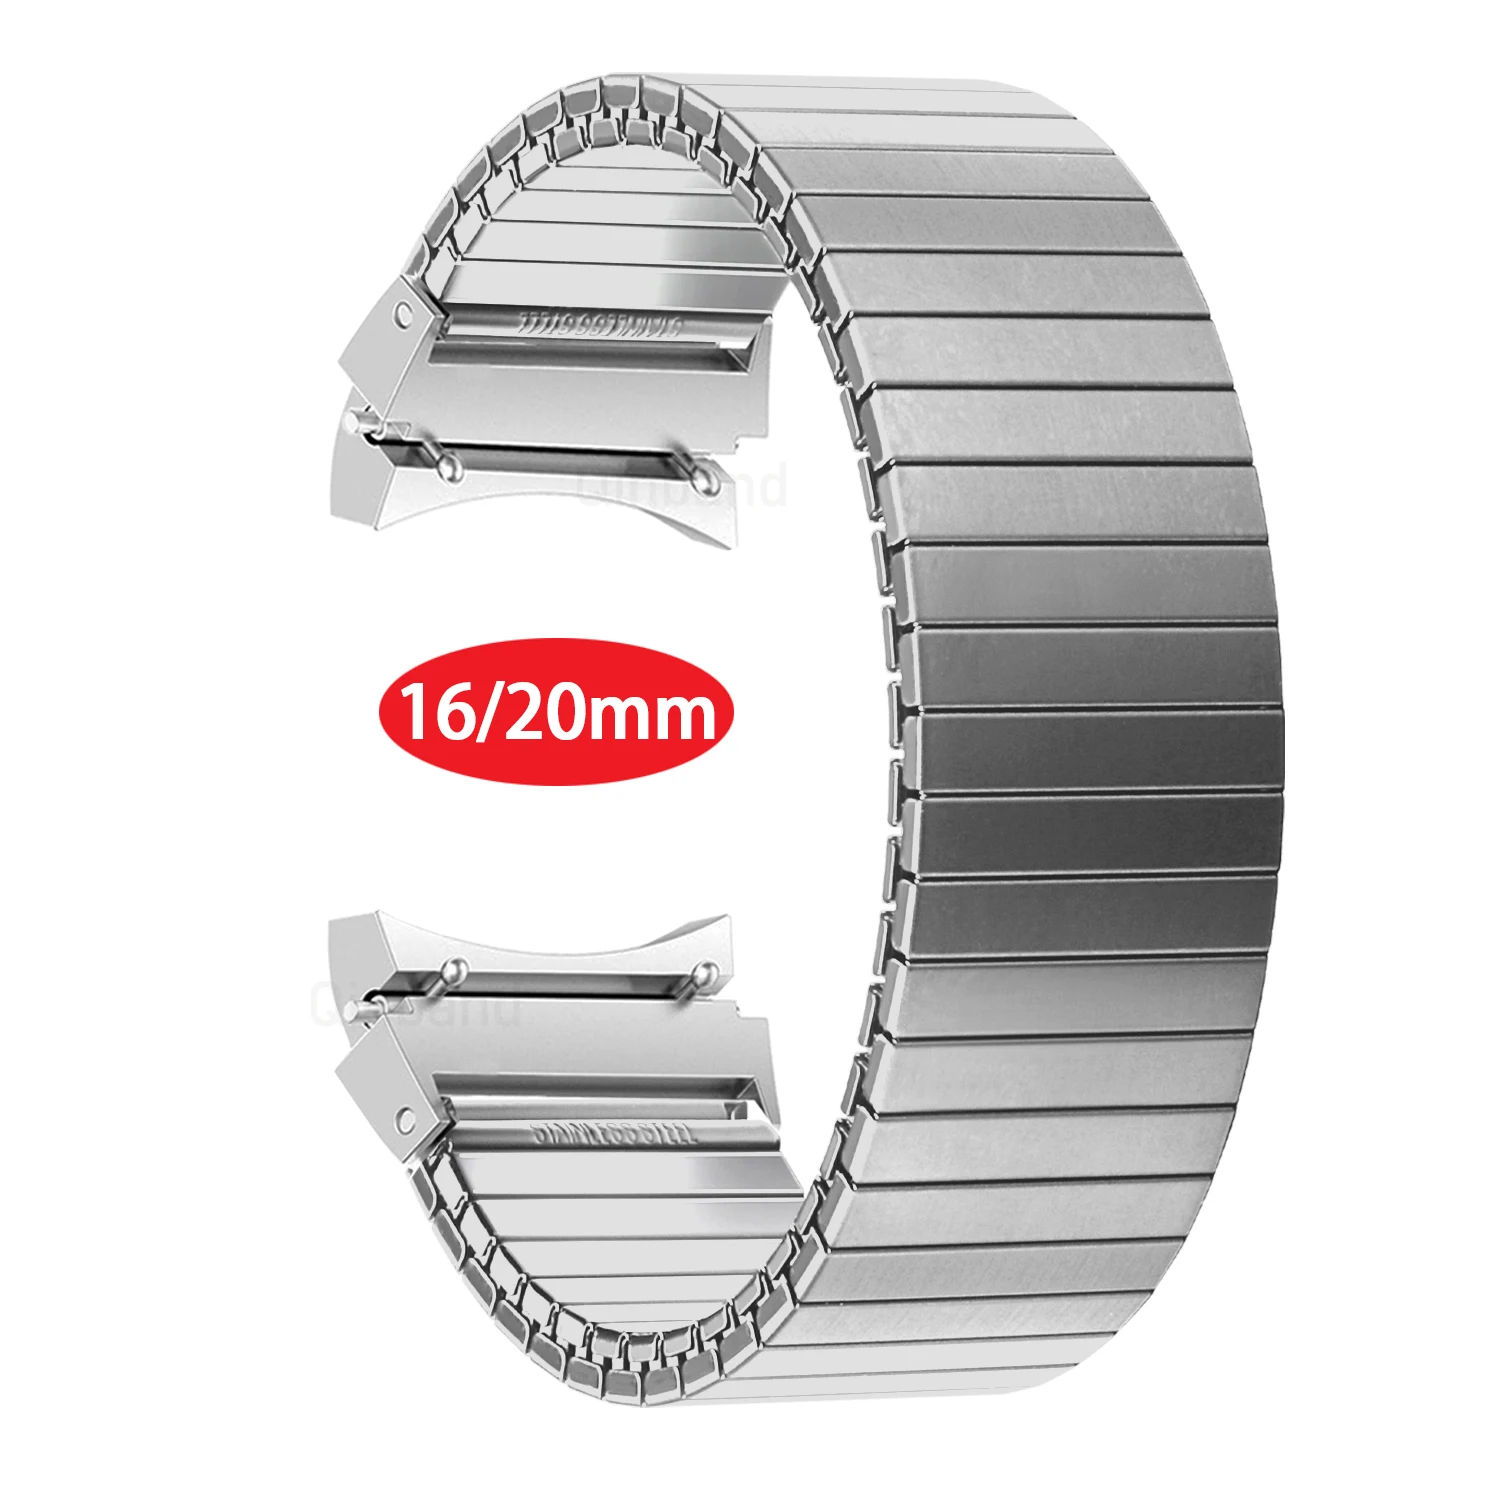 Elastic Bracelet for Samsung Galaxy Watch 4 Classic 42mm 46mm Stainless Steel watch strap for Samsung Galaxy Watch 4 44mm 40mmm